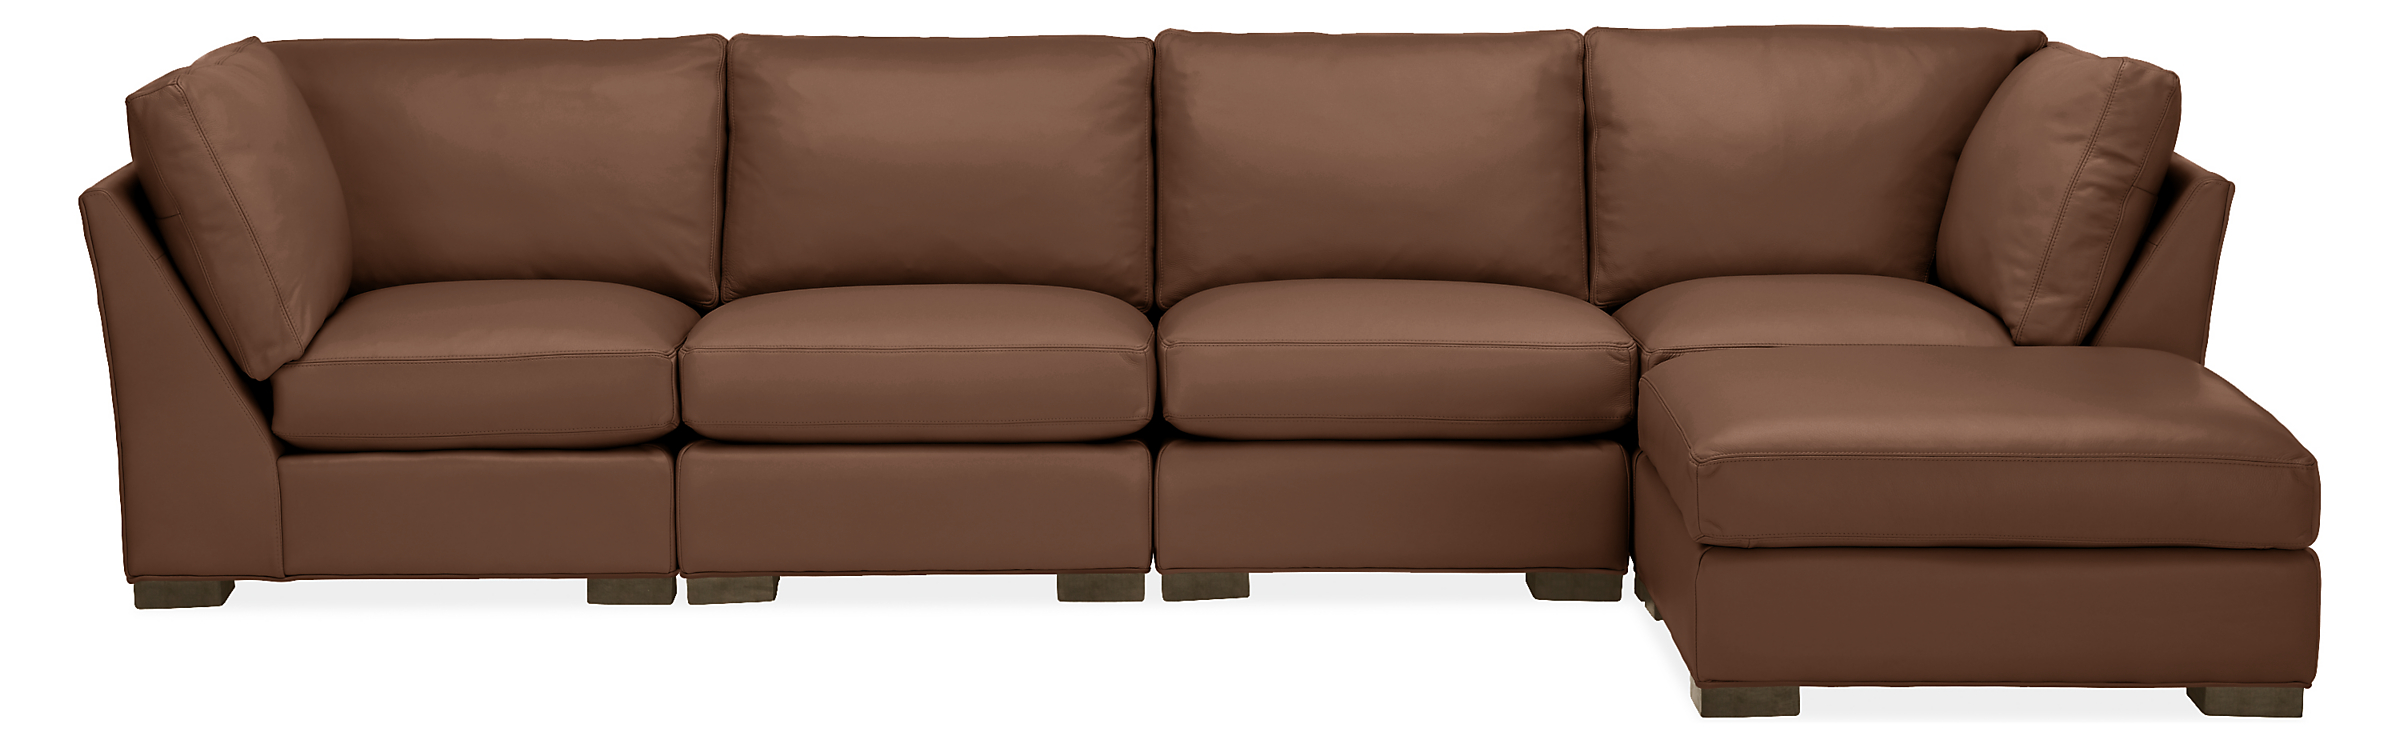 Metro 138x76" Five-Piece Modular Sectional with Ottoman